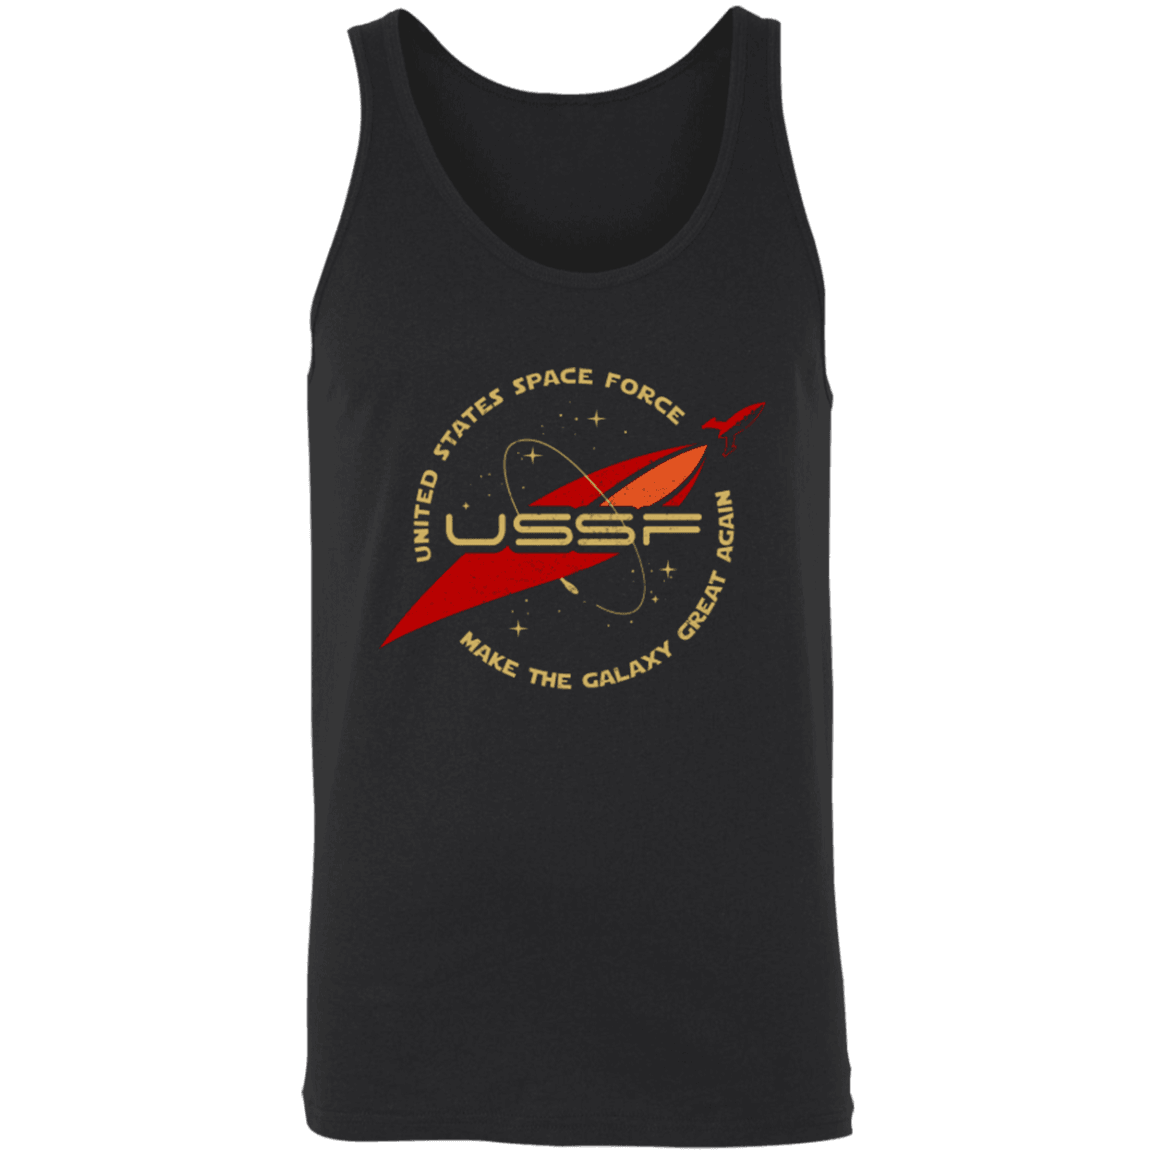 Designs by MyUtopia Shout Out:United States Space Force USSF Unisex Tank,Black / X-Small,T-Shirts